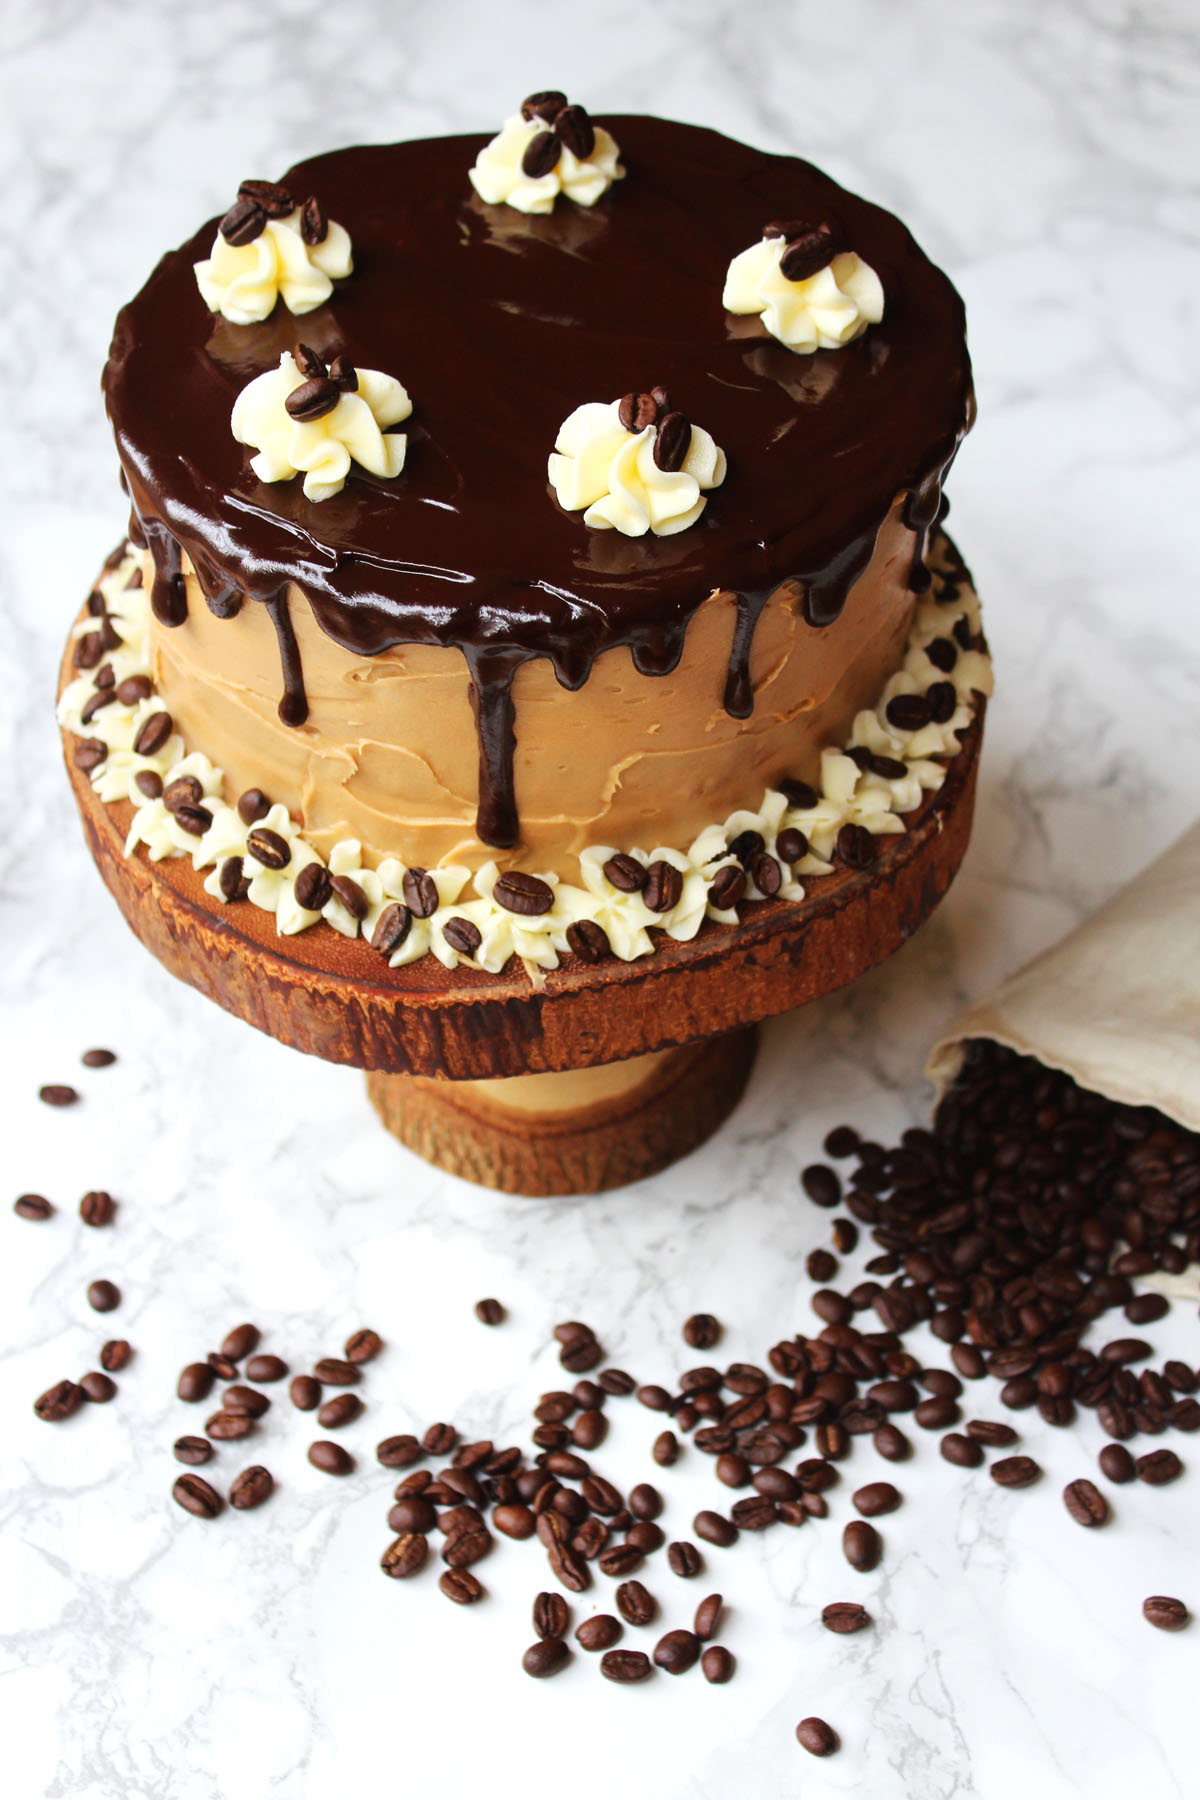 This stunning Mocha Cake is perfect for any celebration whether its a birthday, anniversary, or just to say thank you. Get the recipe for this stunning cake at Supper in the Suburbs